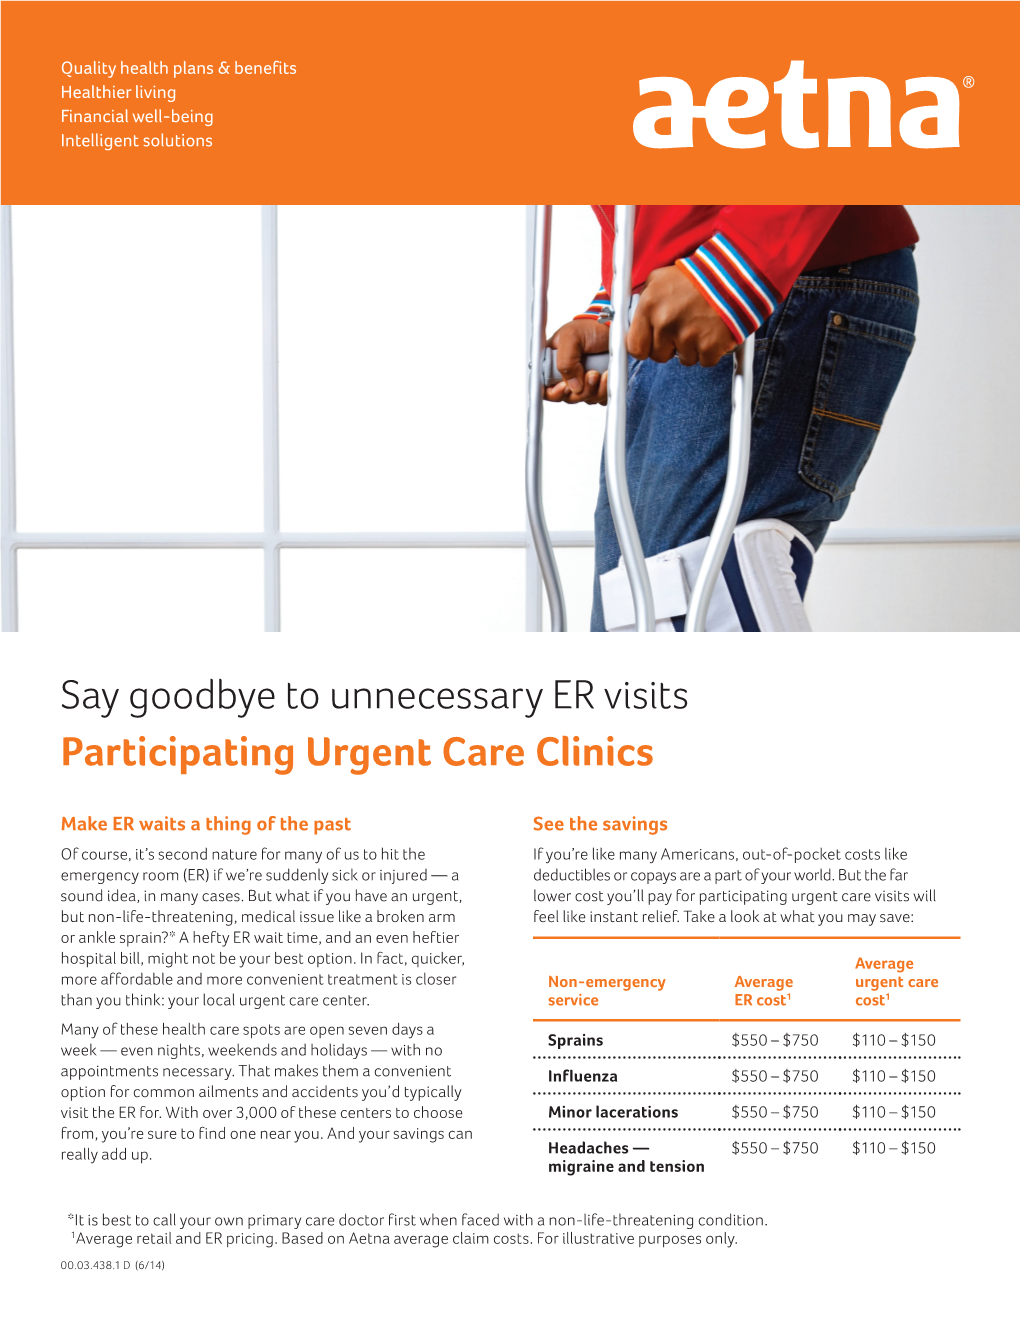 Say Goodbye to Unnecessary ER Visits Participating Urgent Care Clinics